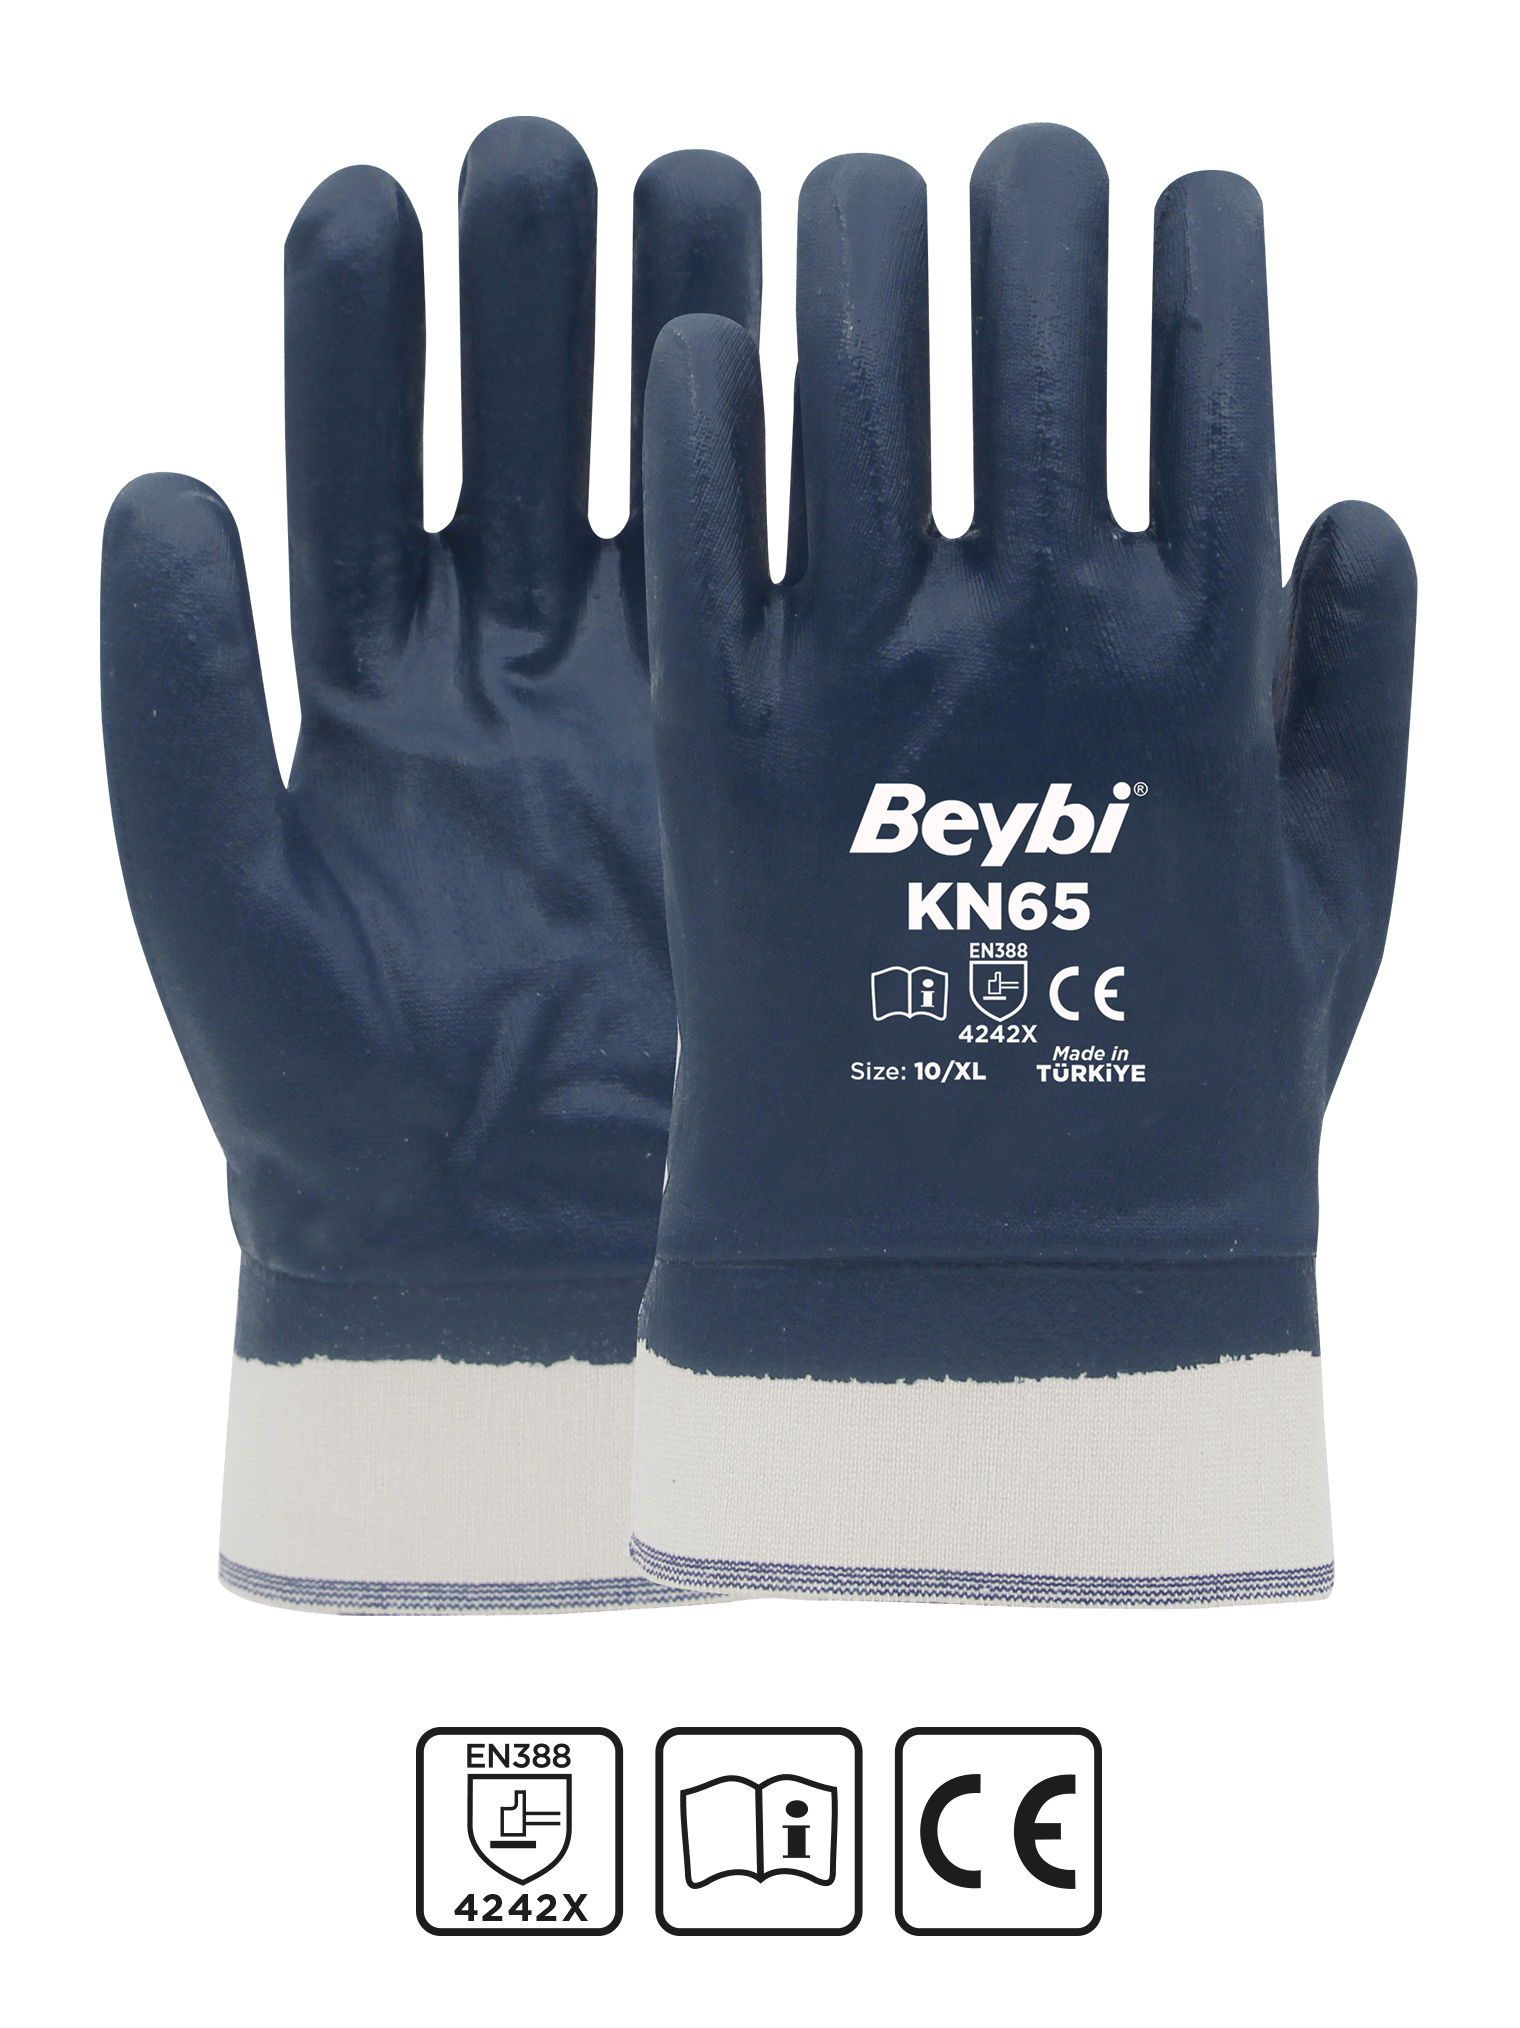 KN65 High Performance Nitrile Coated Cotton Glove